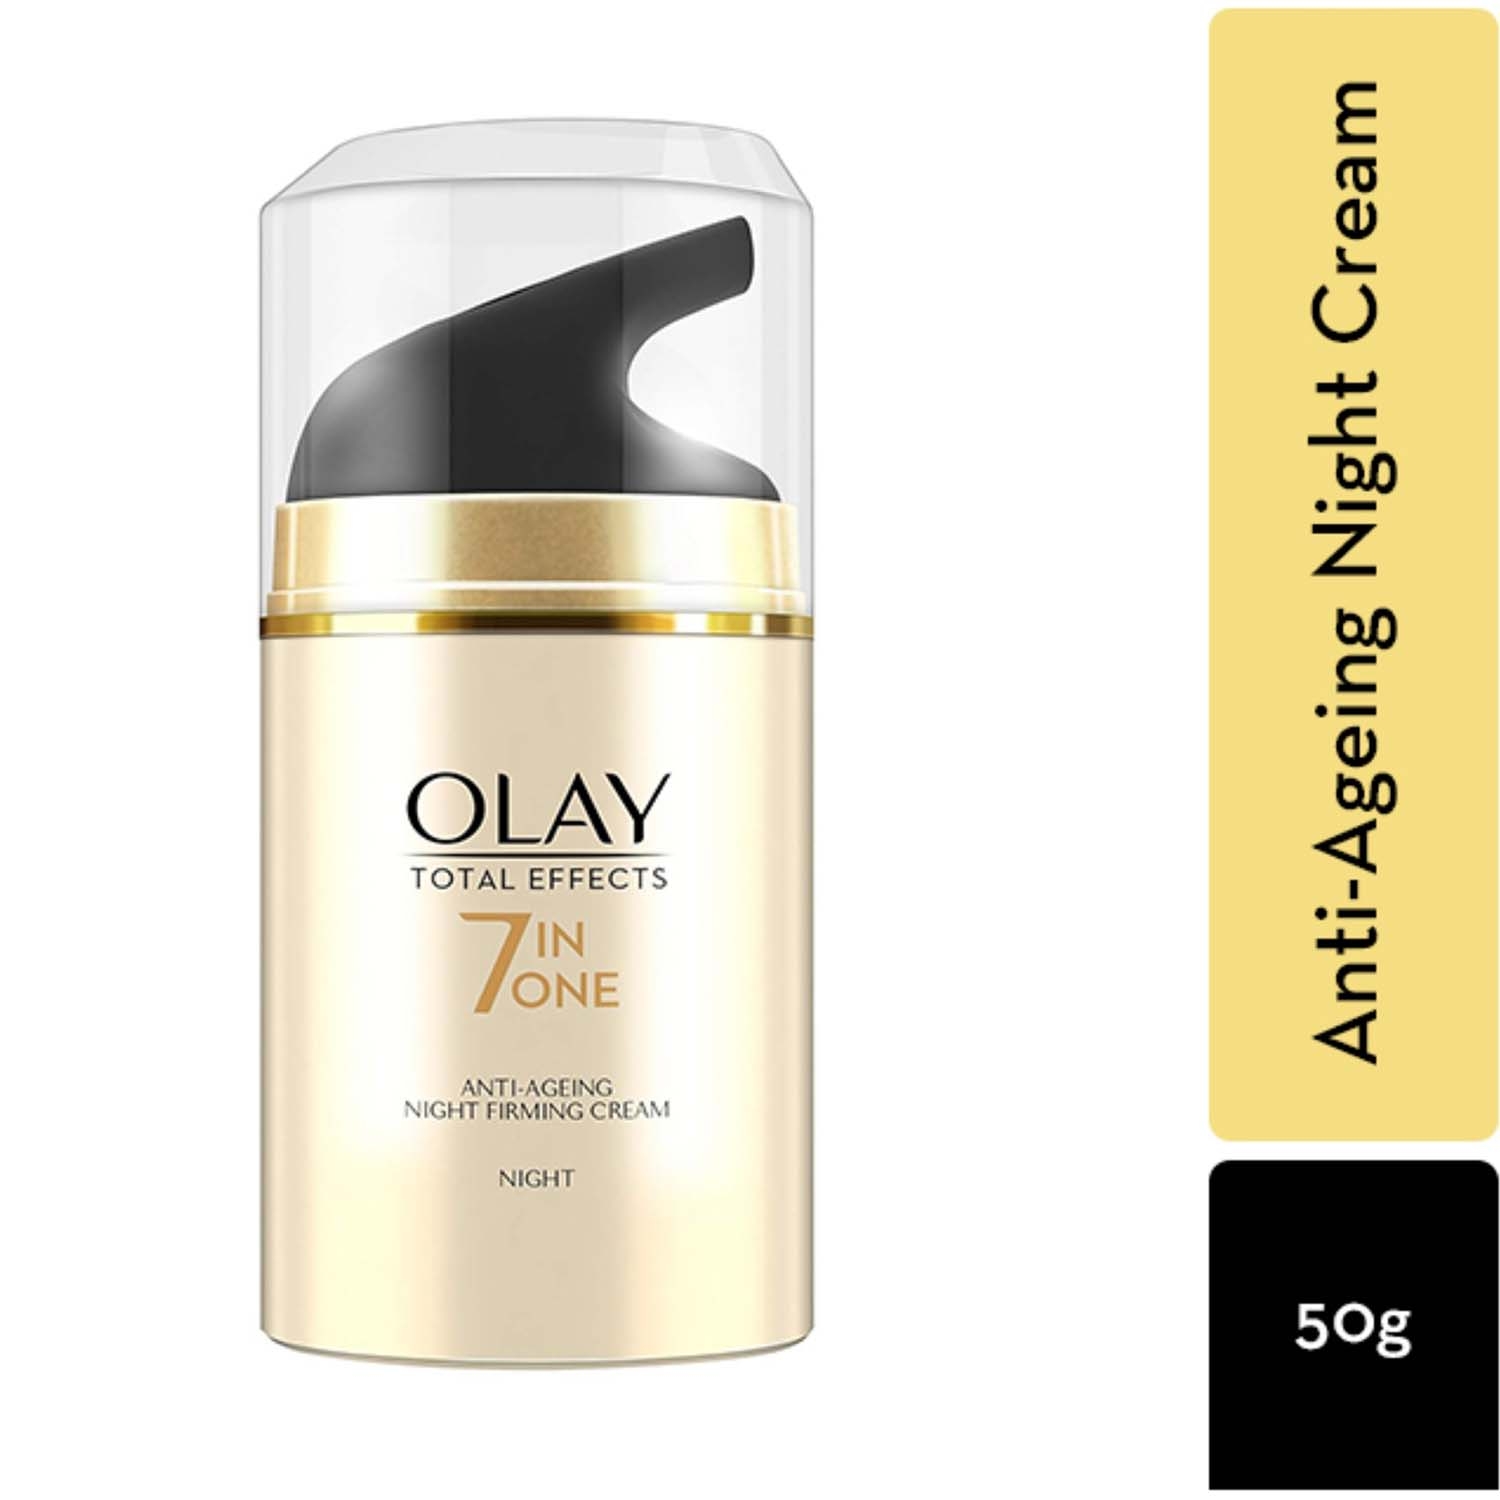 Olay 7-In-1 Total Effects Night Cream (50g)